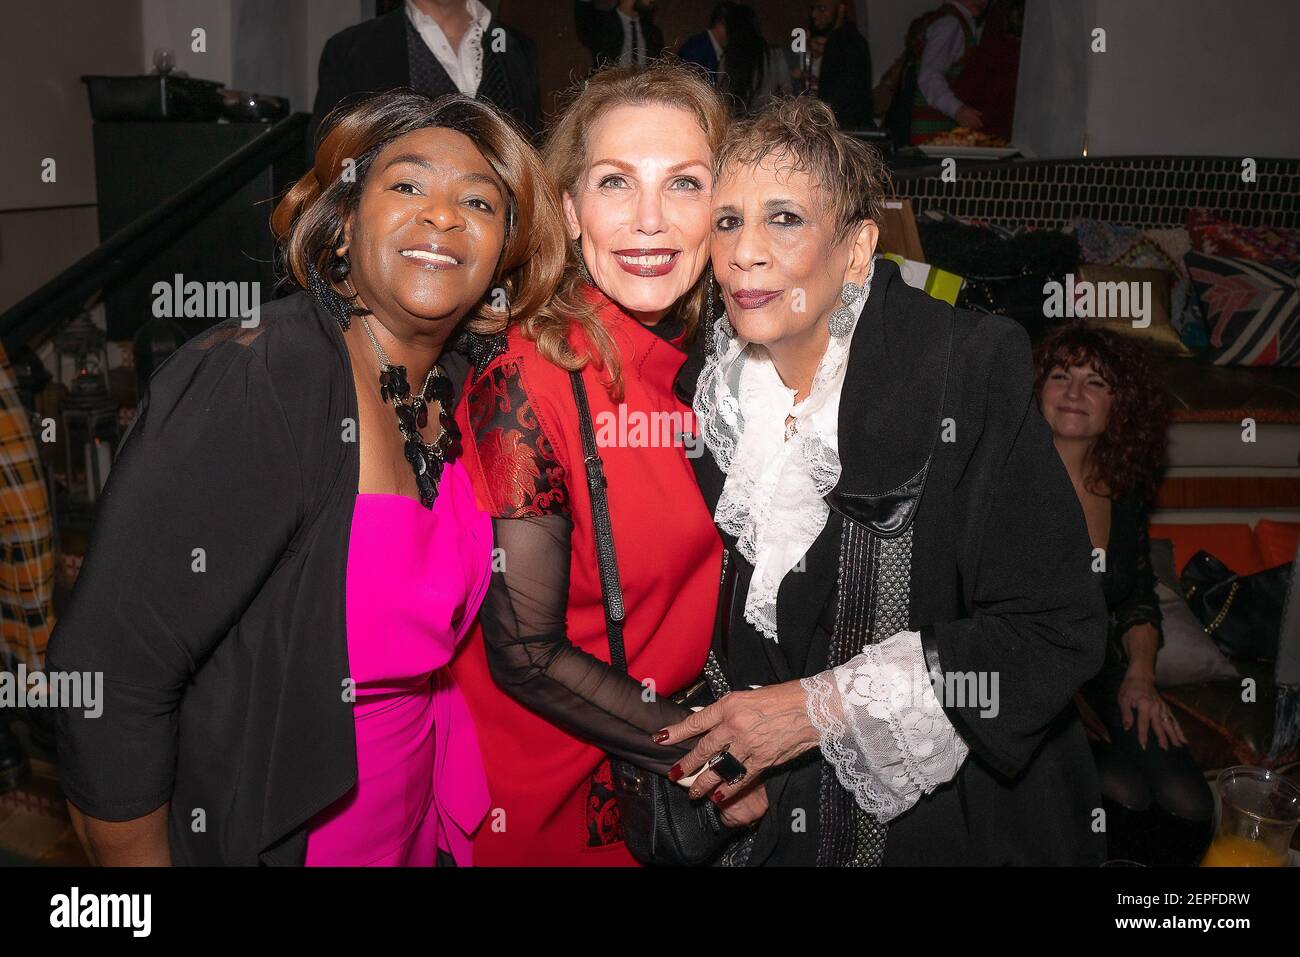 Cassandra Tindal, Denose Pereau and Lucia Kaiser celebrate Lucia Kaiser's birthday at Celon at the Bryant Park Hotel in New York, NY on December 13, 2019. (Photo by David Warren /Sipa? USA) Stock Photo